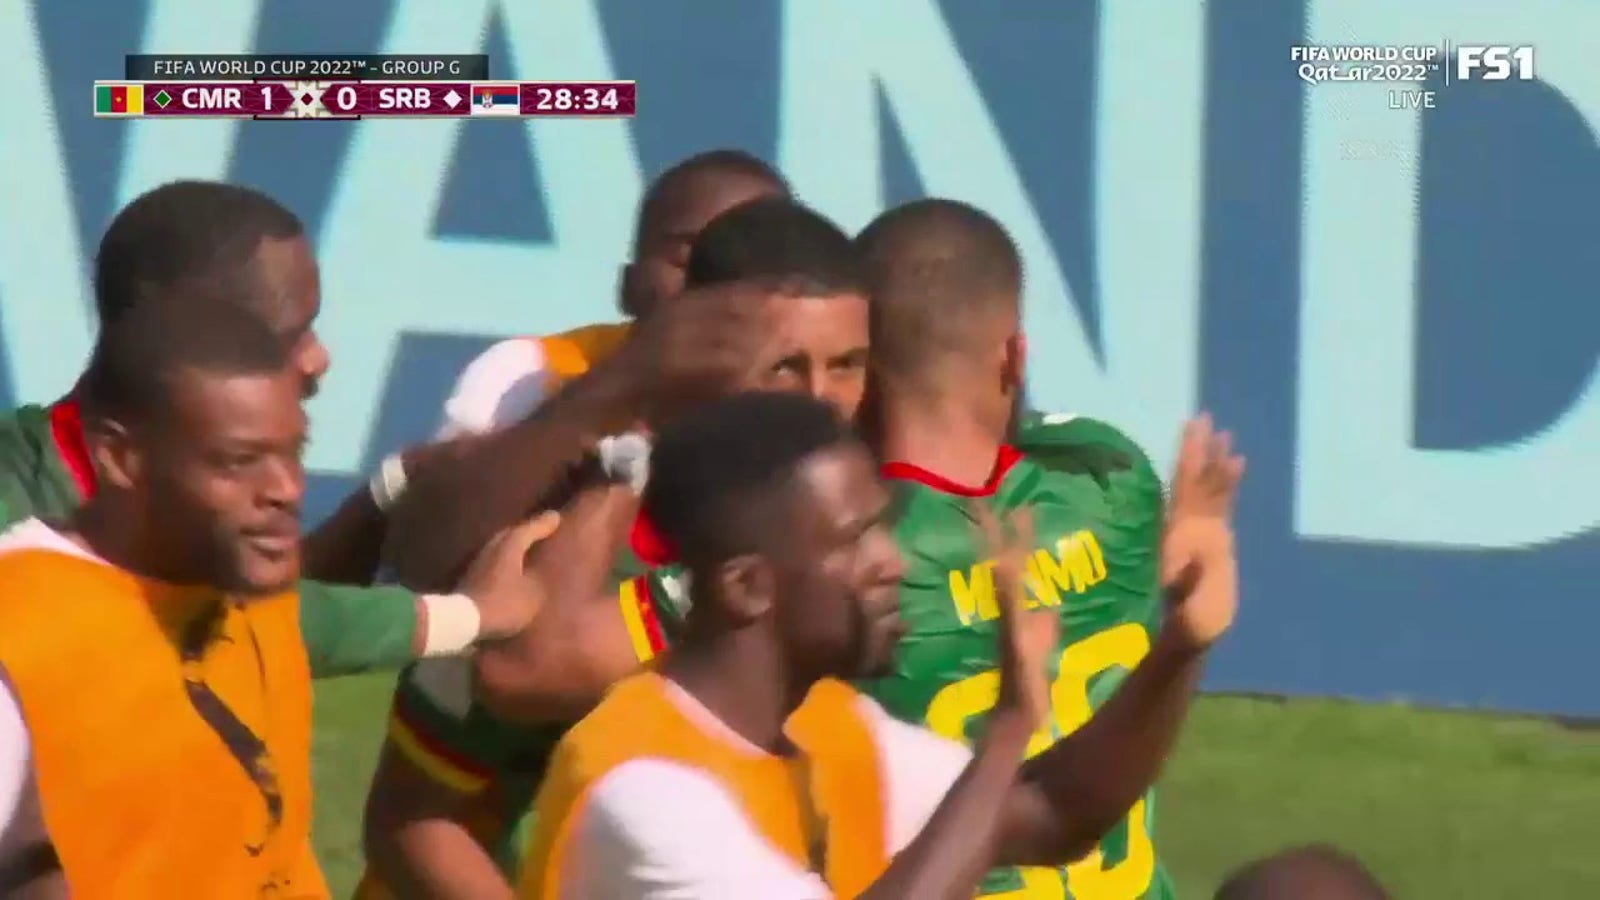 Cameroon's Jean-Charles Castelletto scores goal vs. Serbia in 29'